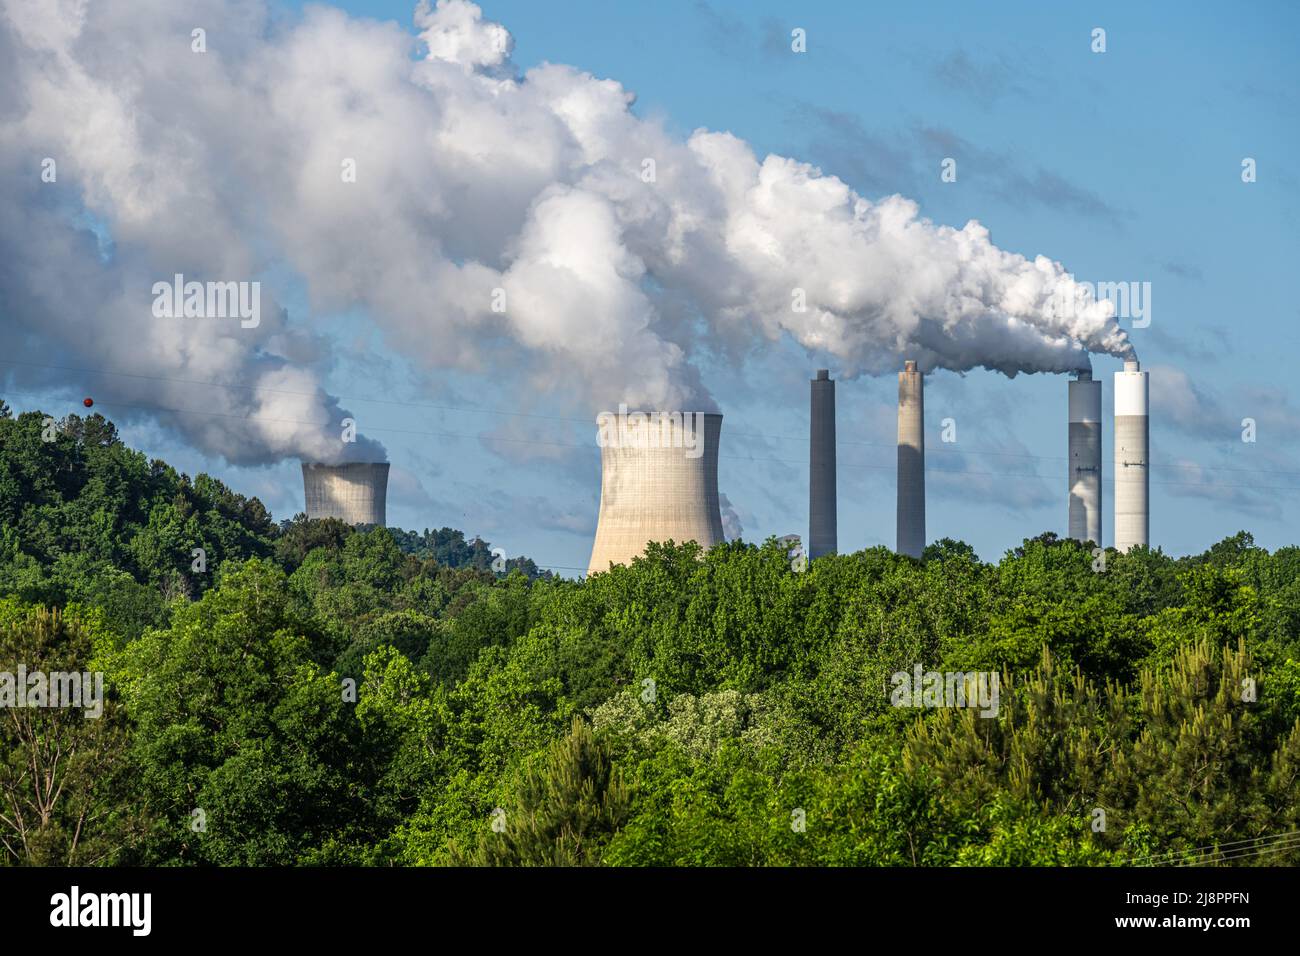 Alabama Power Company’s coal-fired James H. Miller Jr. Electric Generating Plant is located near Birmingham in West Jefferson, Alabama. (USA) Stock Photo